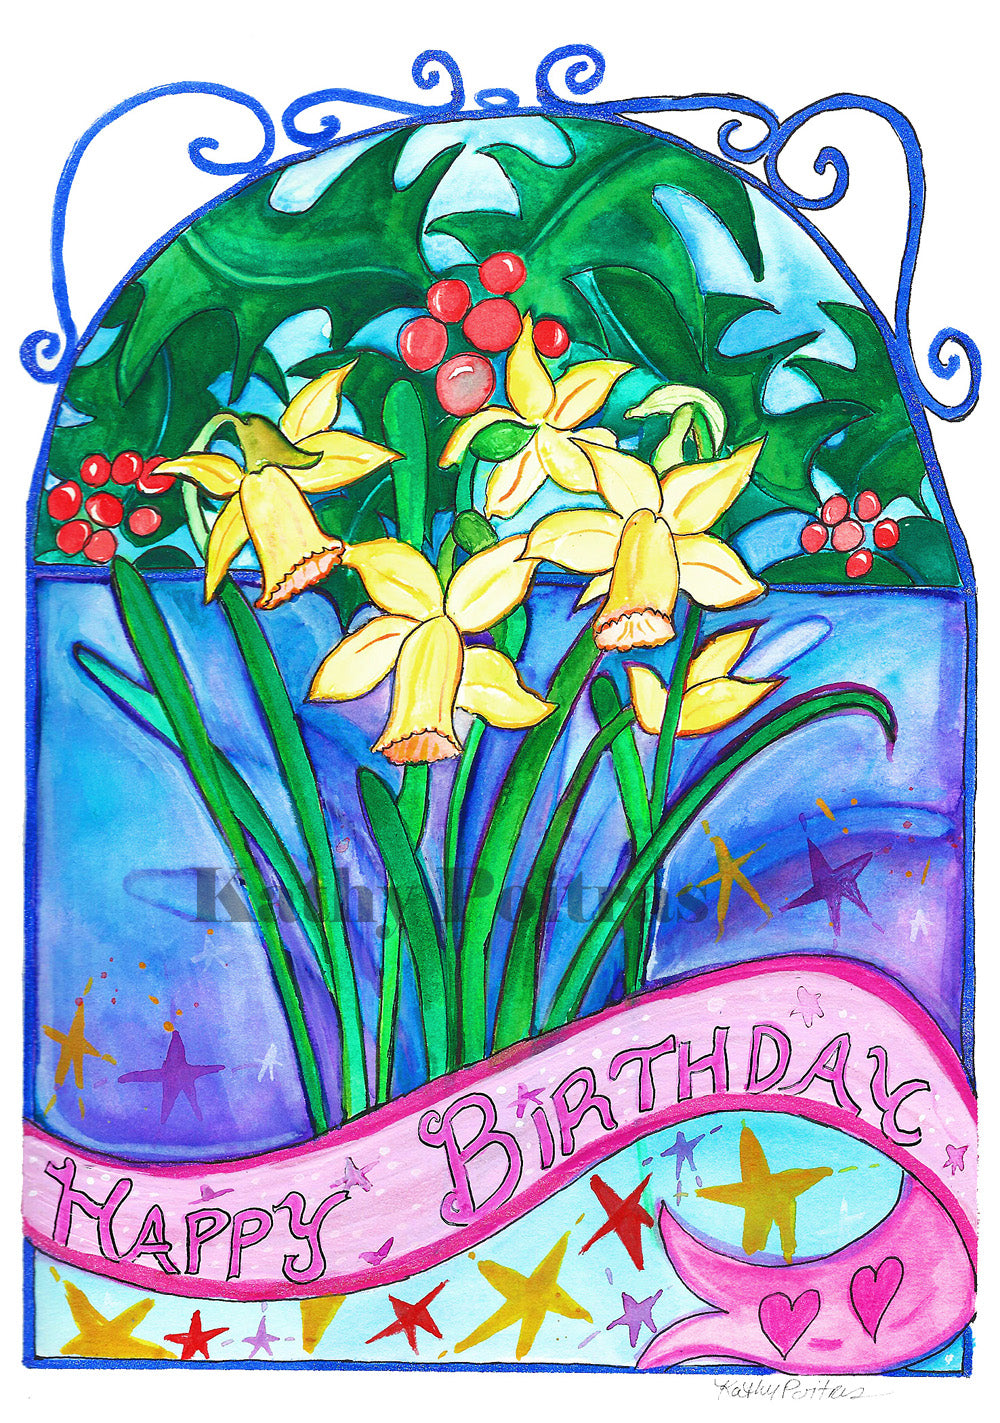 Birthday card, in the naïve folk art style by Kathy Poitras. Inspired by the Narcissus and Holly,  birth  flowers of the month for December.  Narcissus and Holly  with a stain glass inspired background.   There are swirls and hearts and a swirly celebratory ribbon that says HAPPY BIRTHDAY with stars.